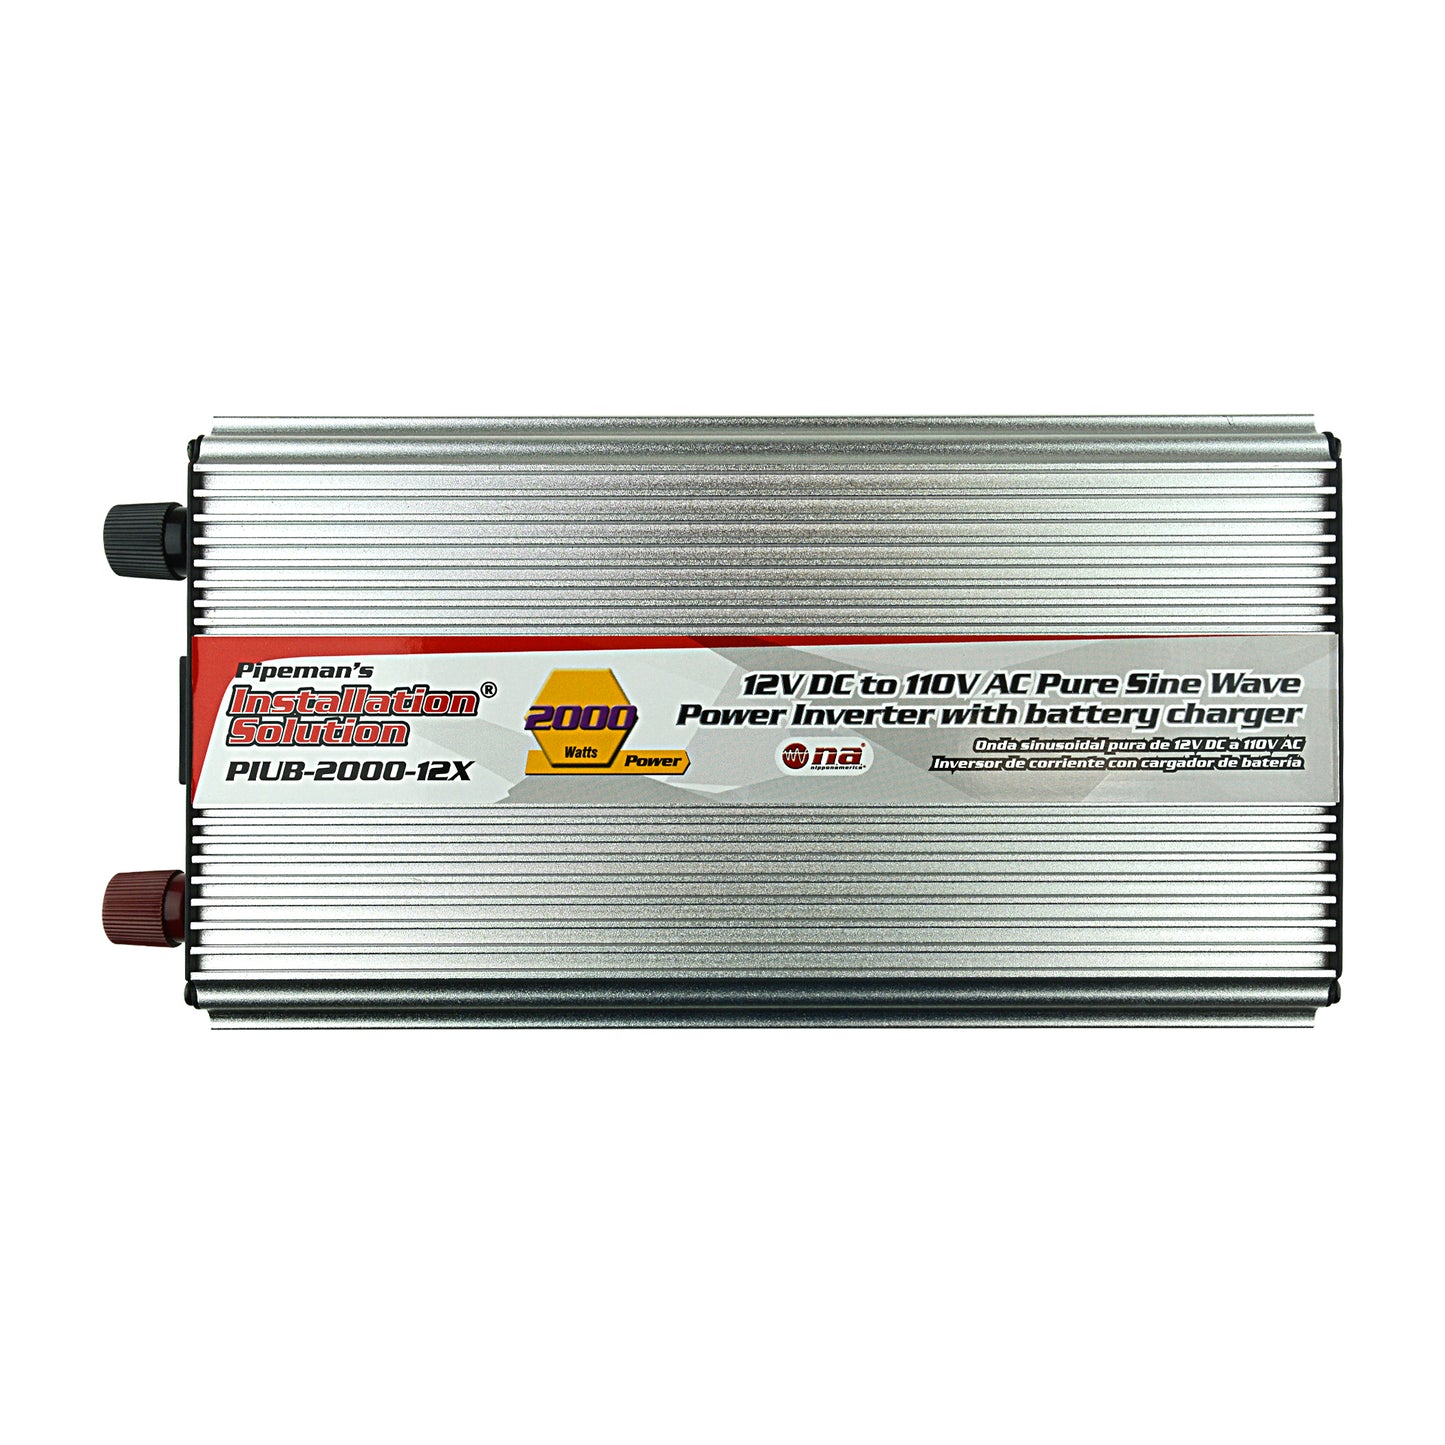 PIUB-2000-12X - 2000W 12V DC to 110V AC Pure Sine Wave Power Inverter with Battery Charger